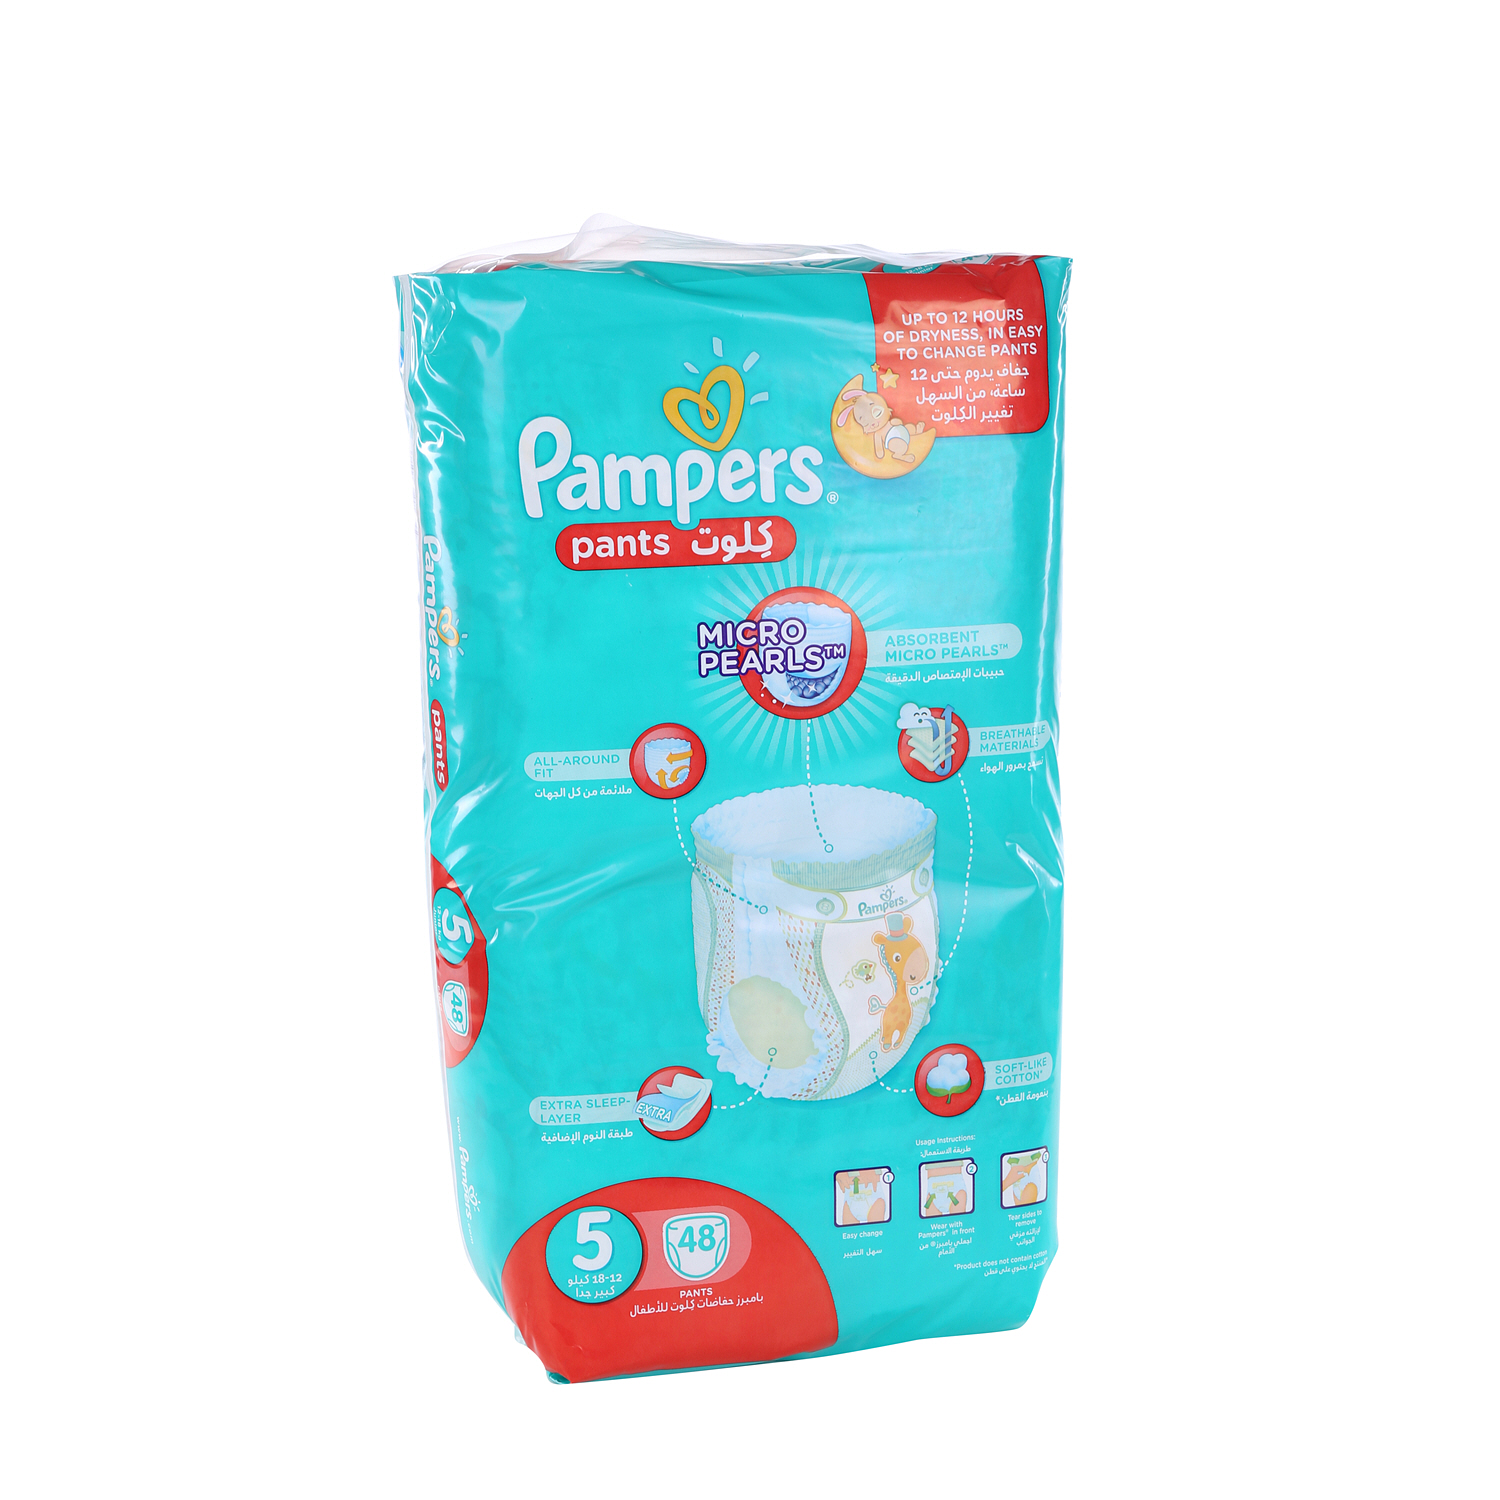 Pampers Pants Size 5 Japanese Pack 48 Pieces